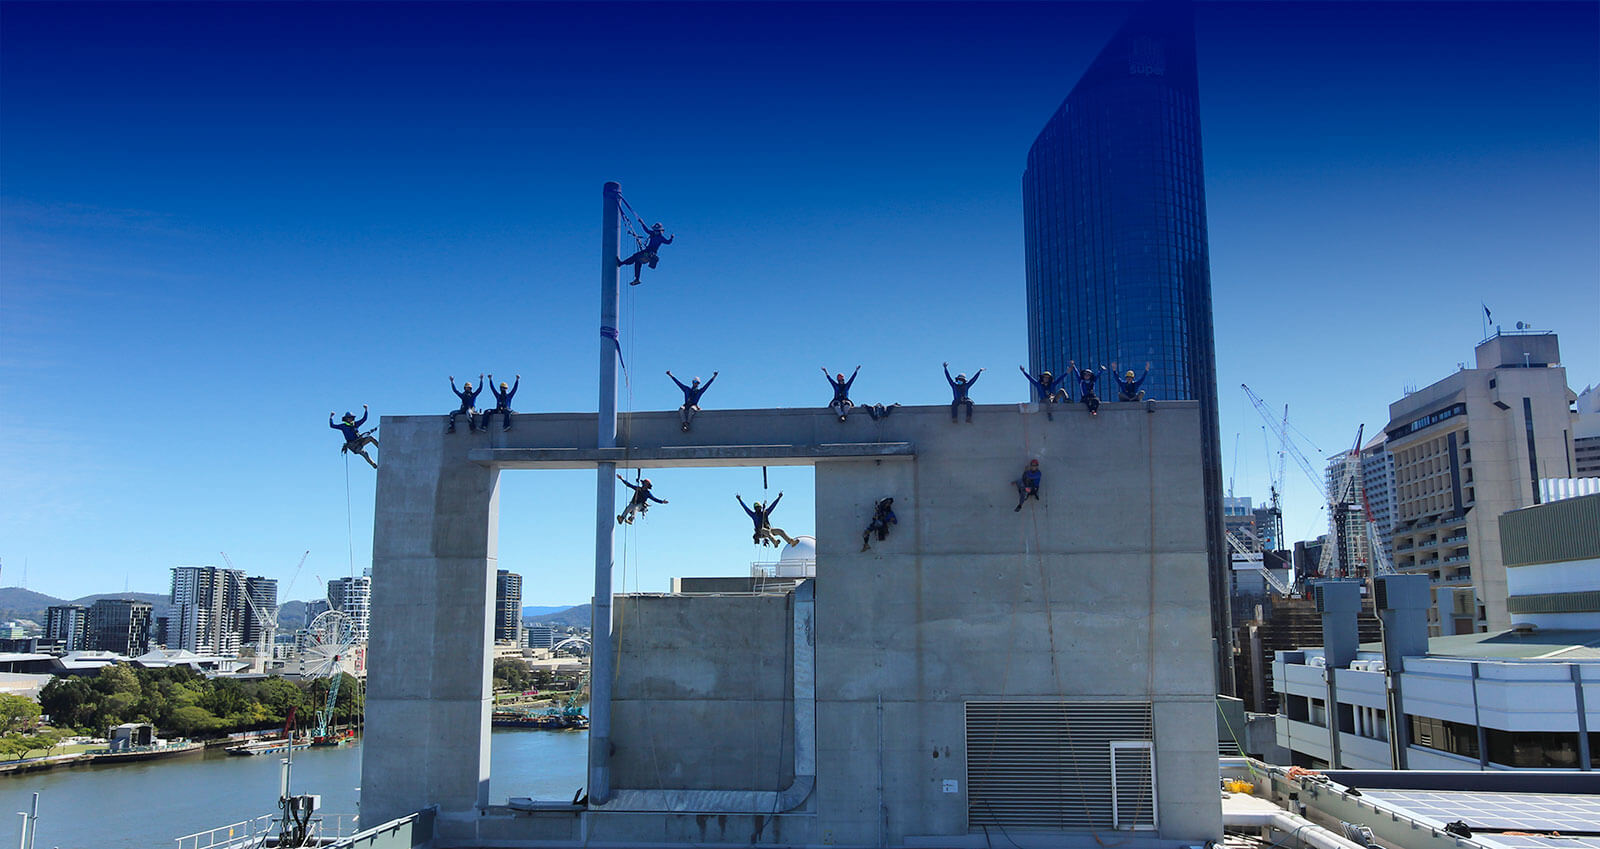 The Gecko Rope Access team climbing high in the city